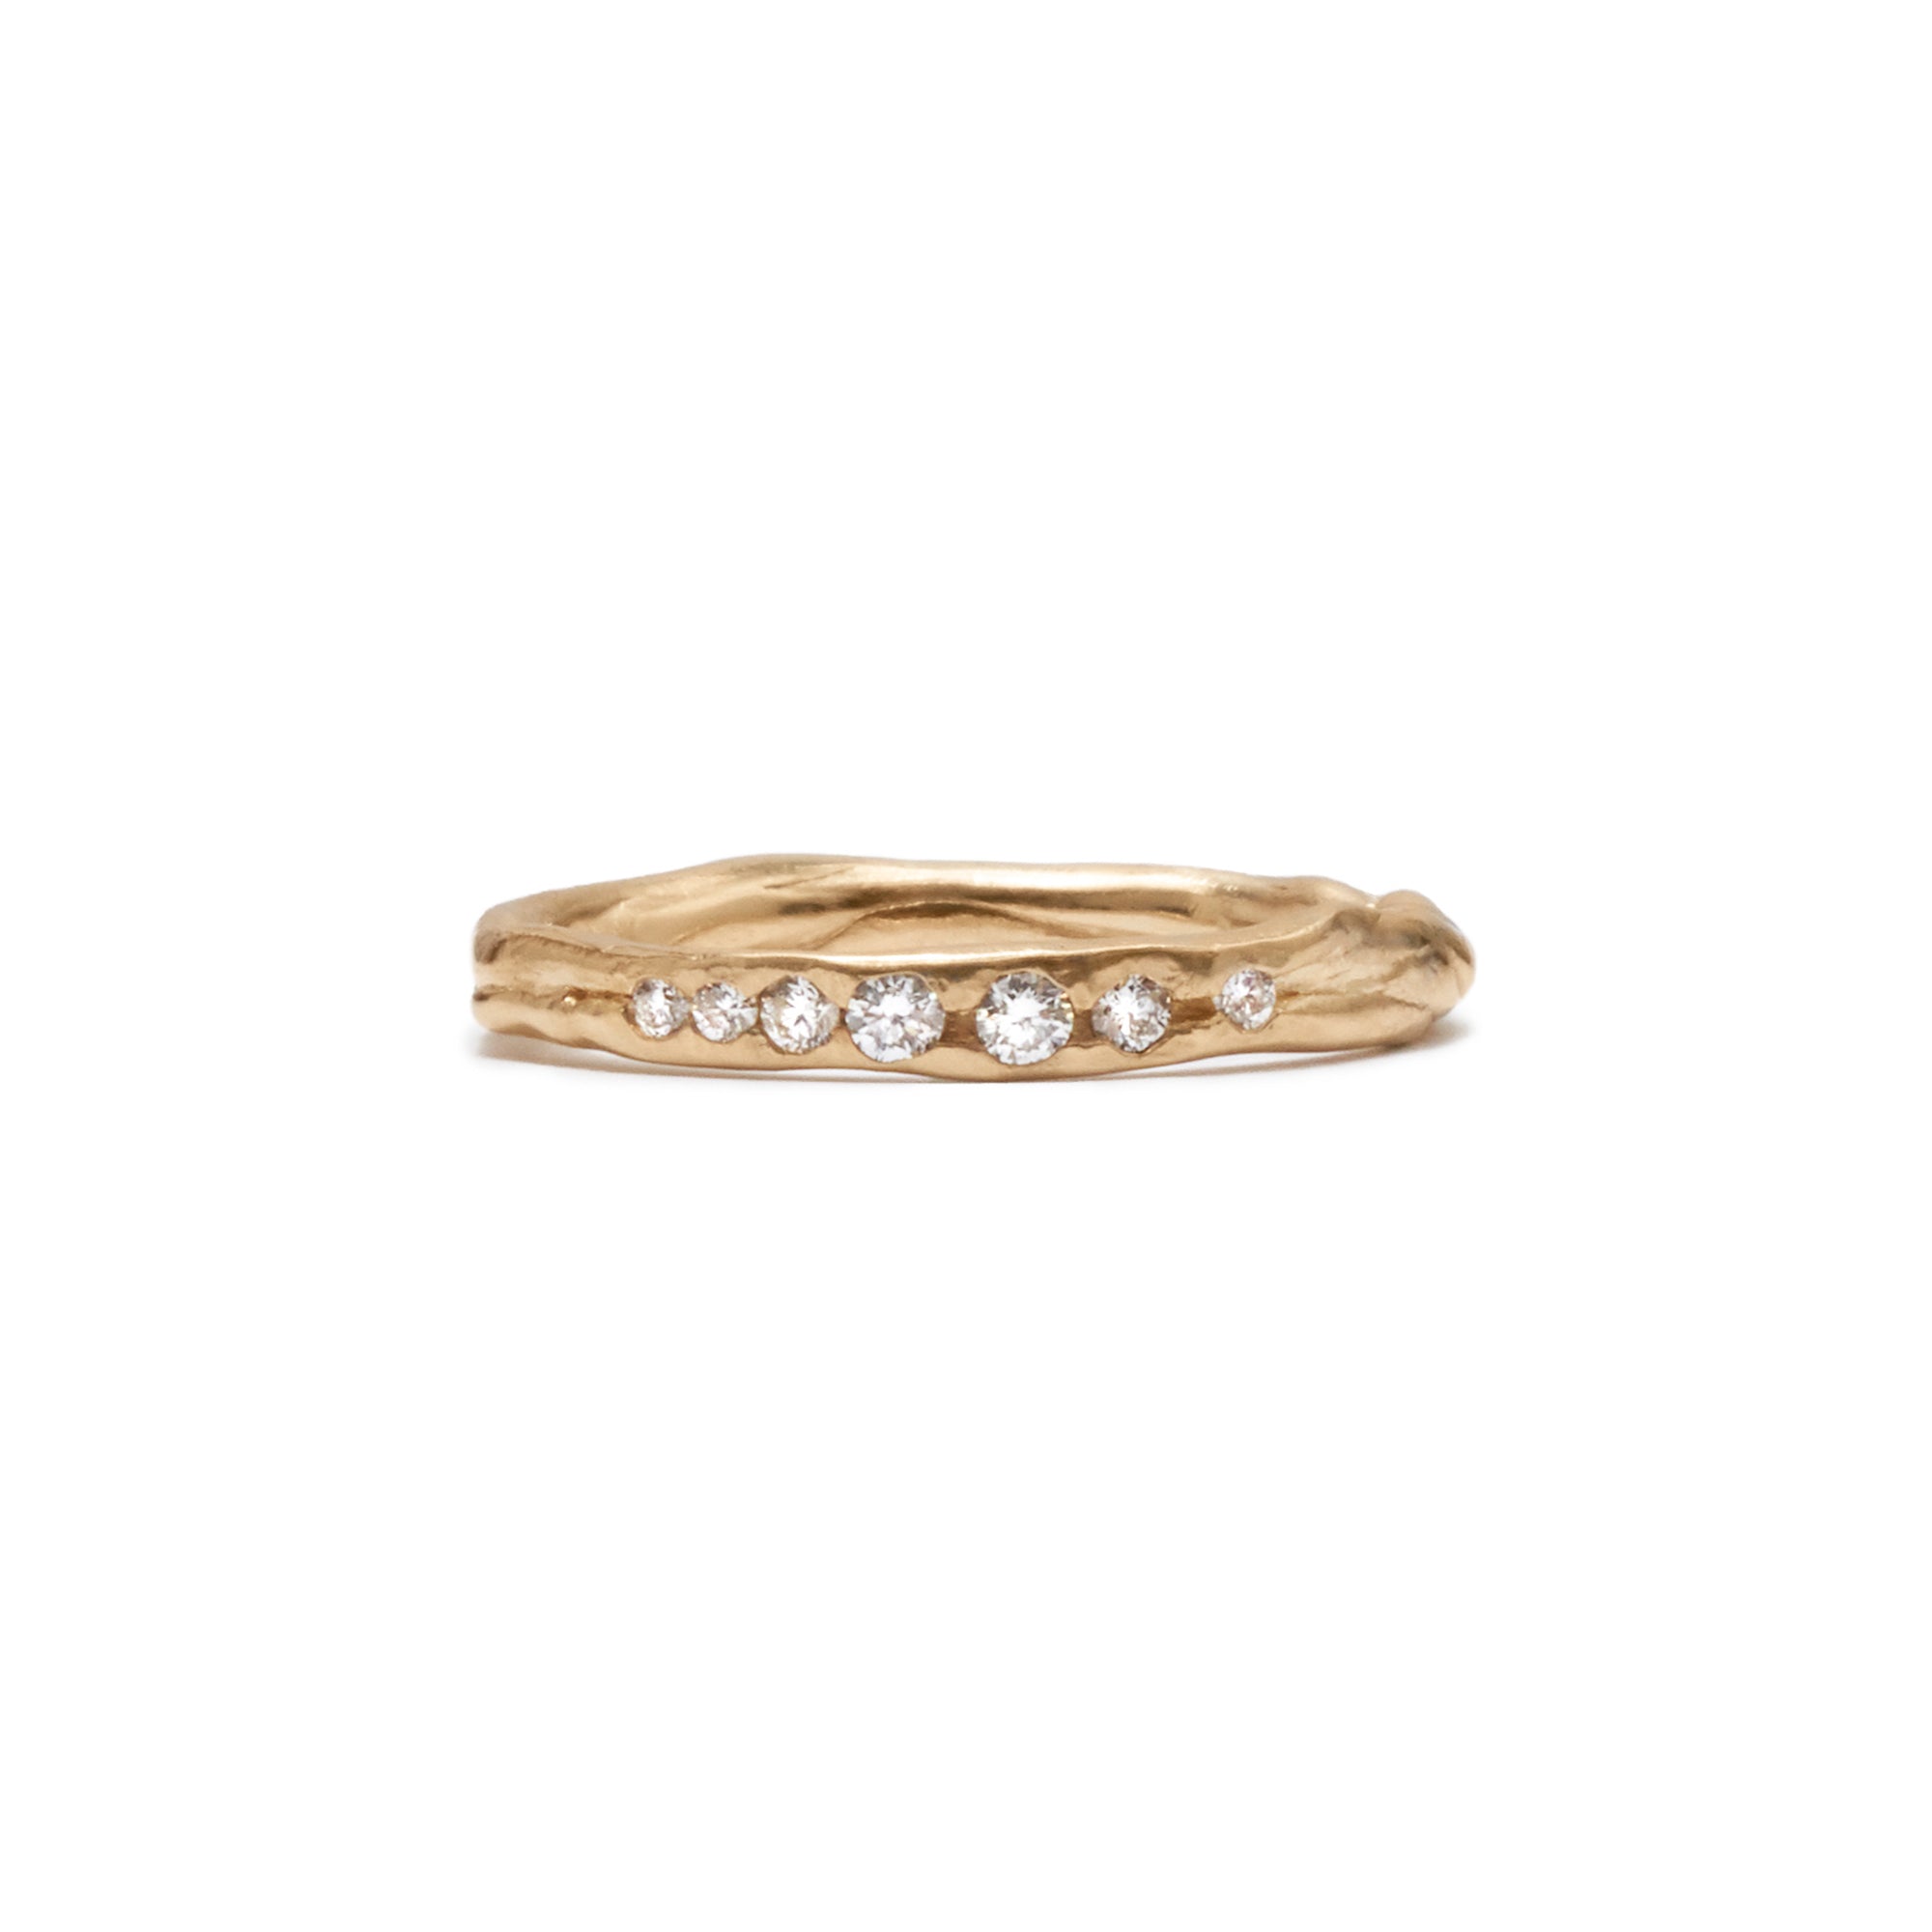 The unique Barrier band showcases seven graduated white diamonds, set across the front of an organic 14k band